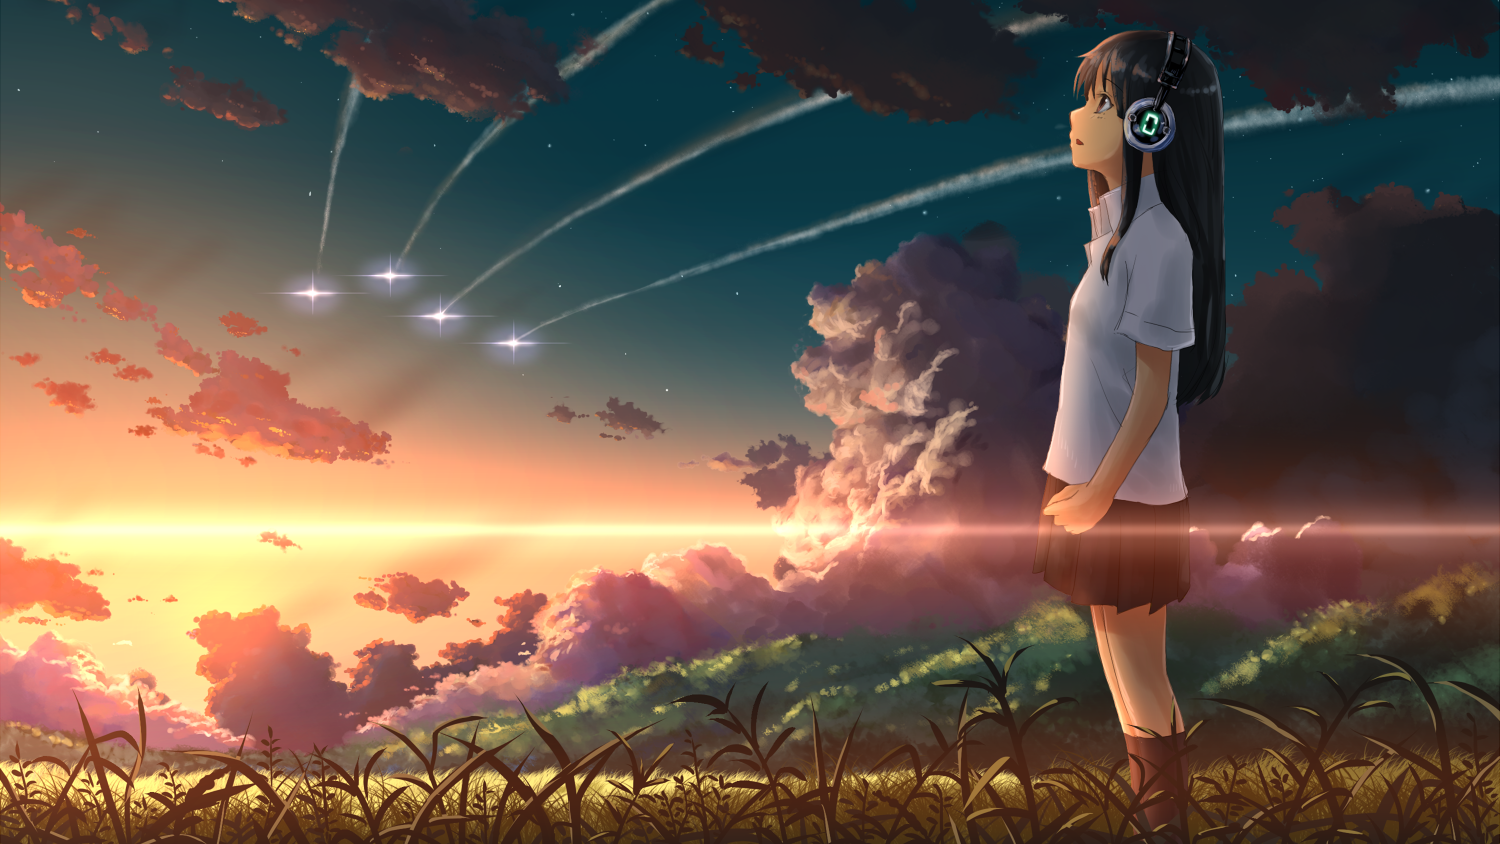 Anime 1500x844 anime headphones original characters anime girls sky sunlight clouds women outdoors standing looking up music